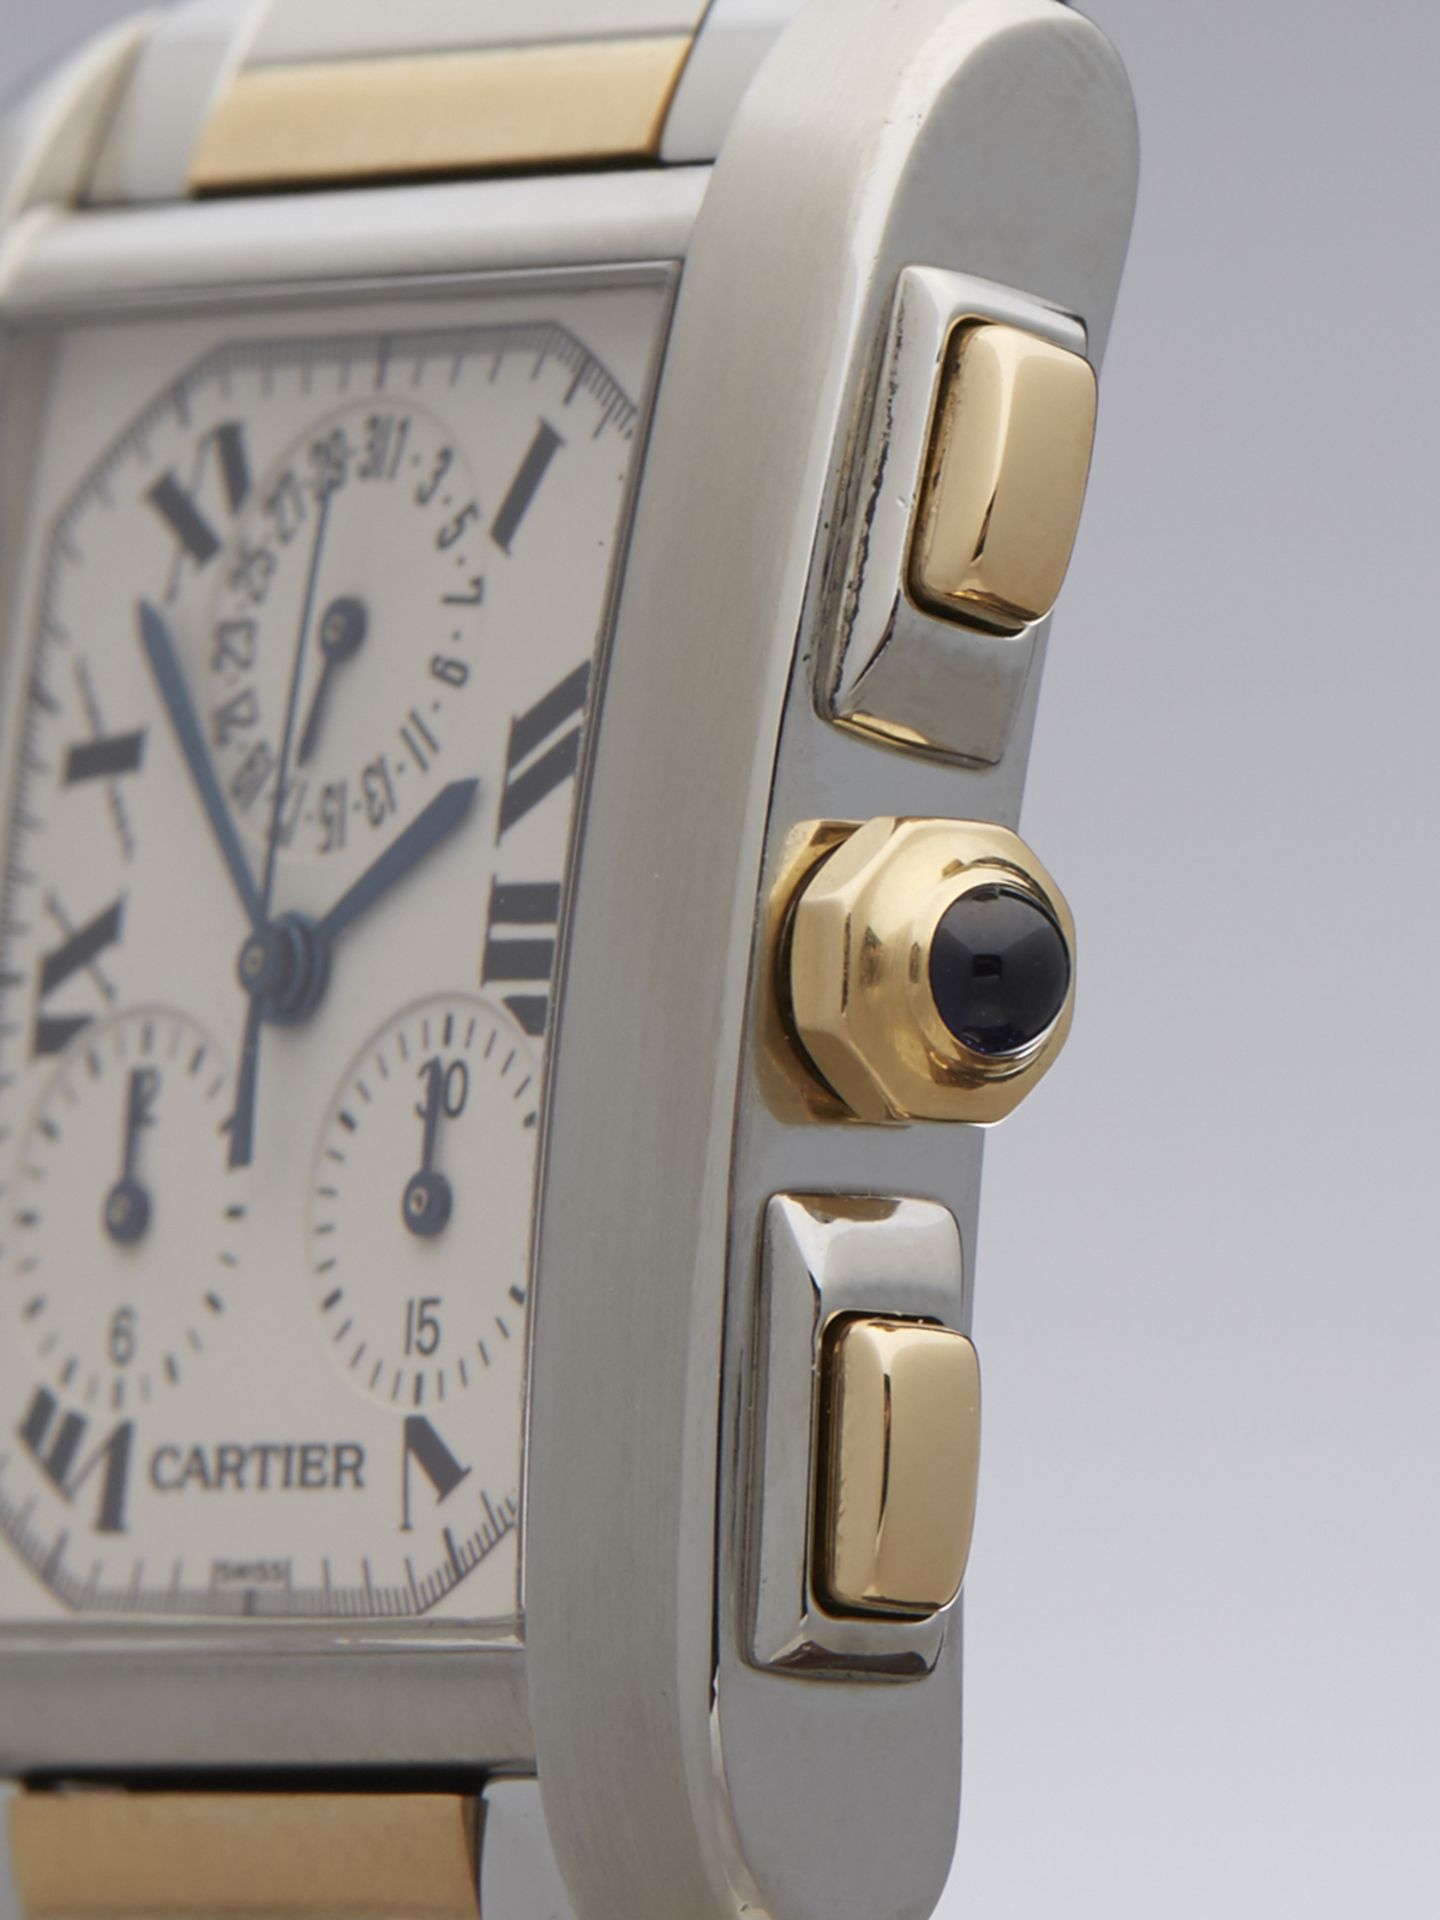 Cartier Tank Francaise Chronoreflex 28mm Stainless Steel & 18k Yellow Gold 2303 or W51004Q4 - Image 5 of 10